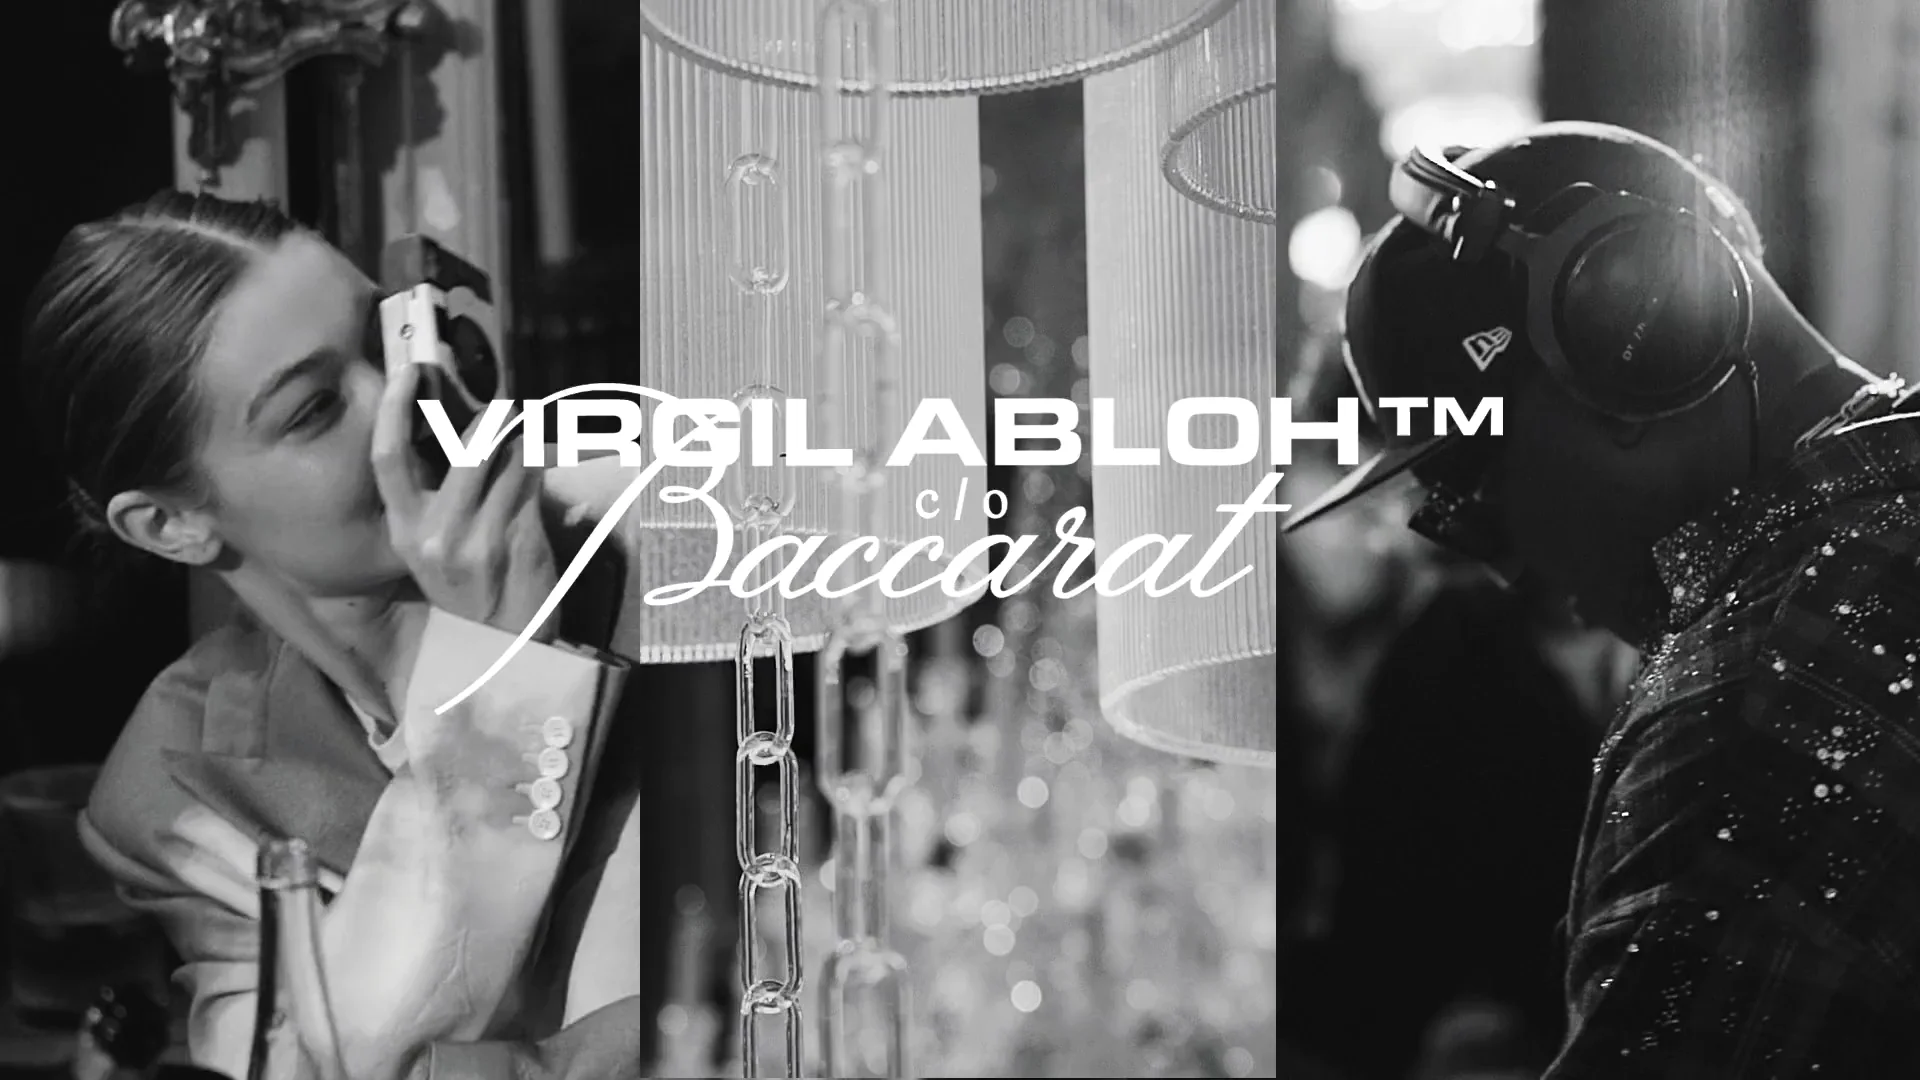 Virgil Abloh x Baccarat Collaboration Launching Party